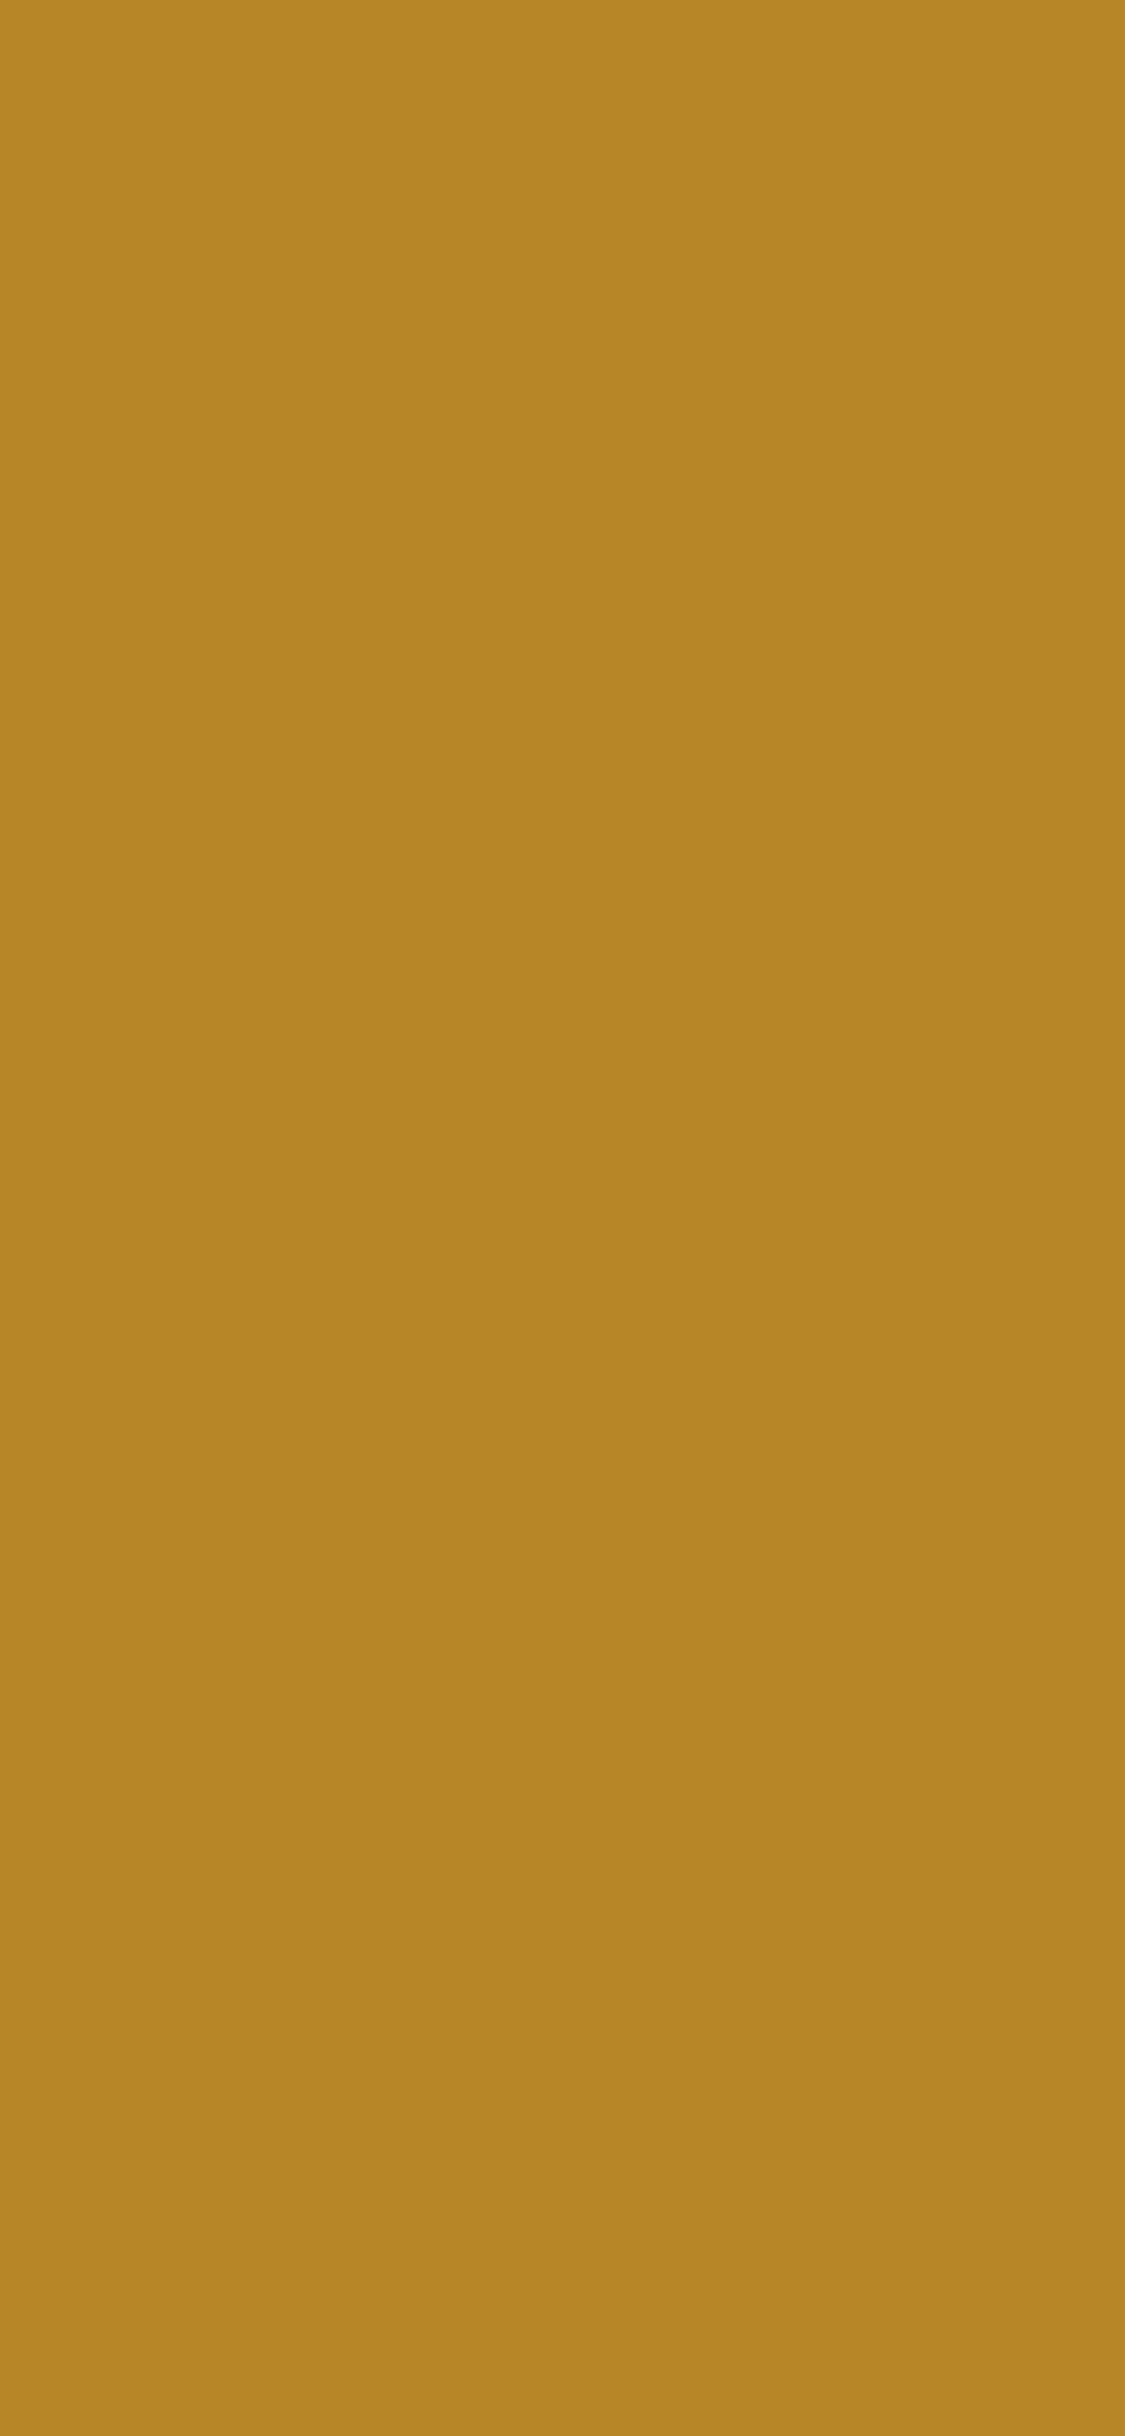 1125x2436 University Of California Gold Solid Color Background